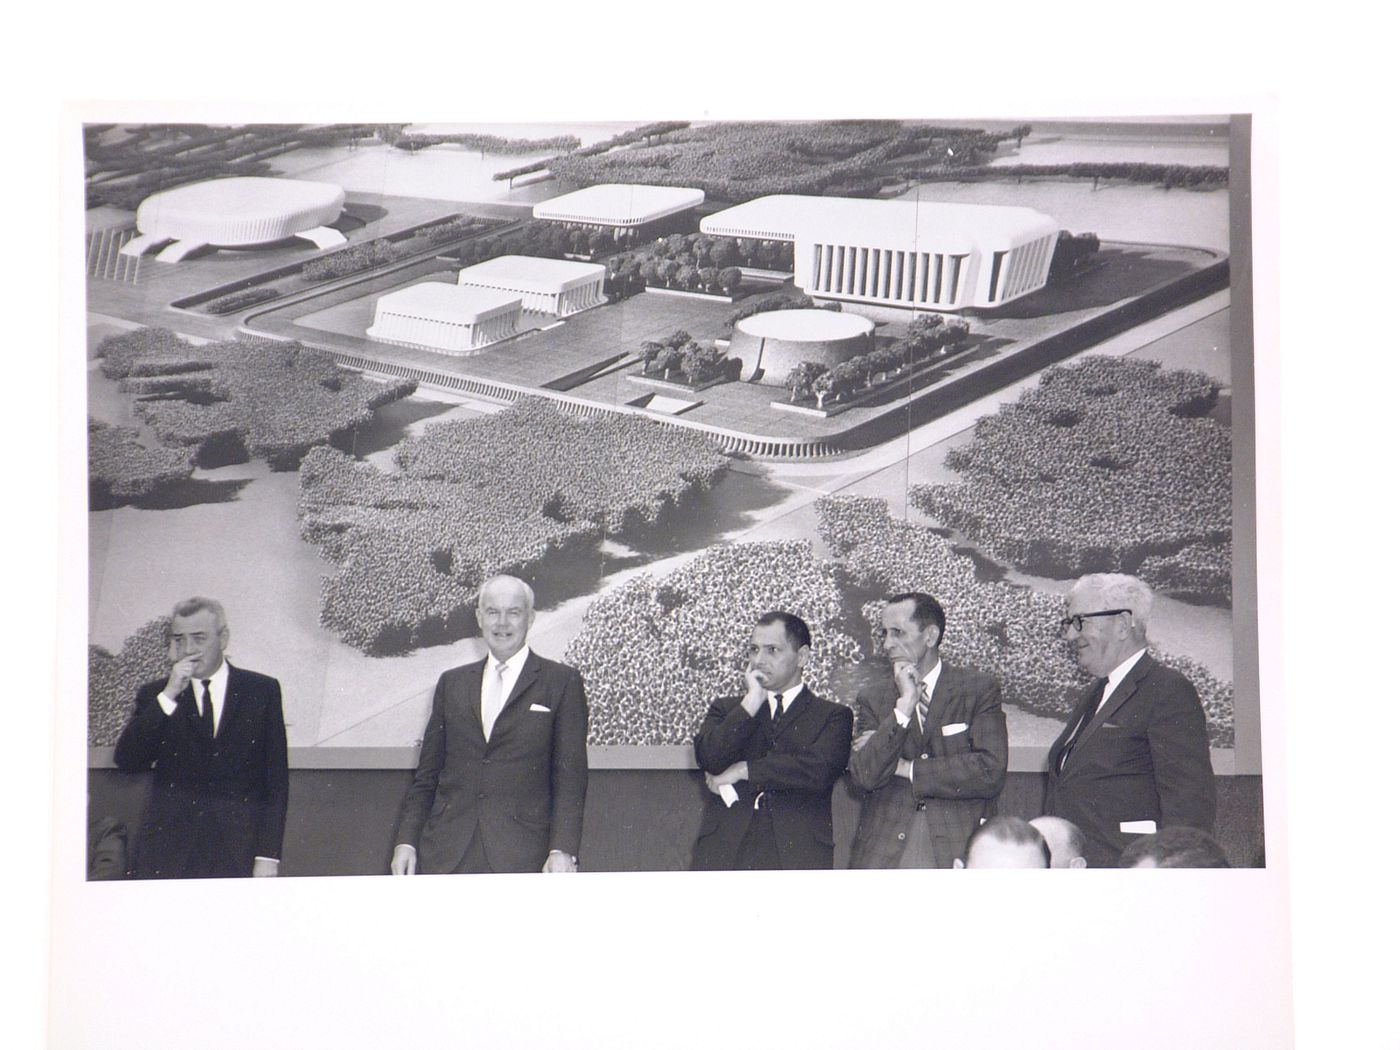 View of the dedication ceremony of the John F. Kennedy Educational, Civic and Cultural Center showing a photograph of the model of the building and five men on the platform, Mineola, New York